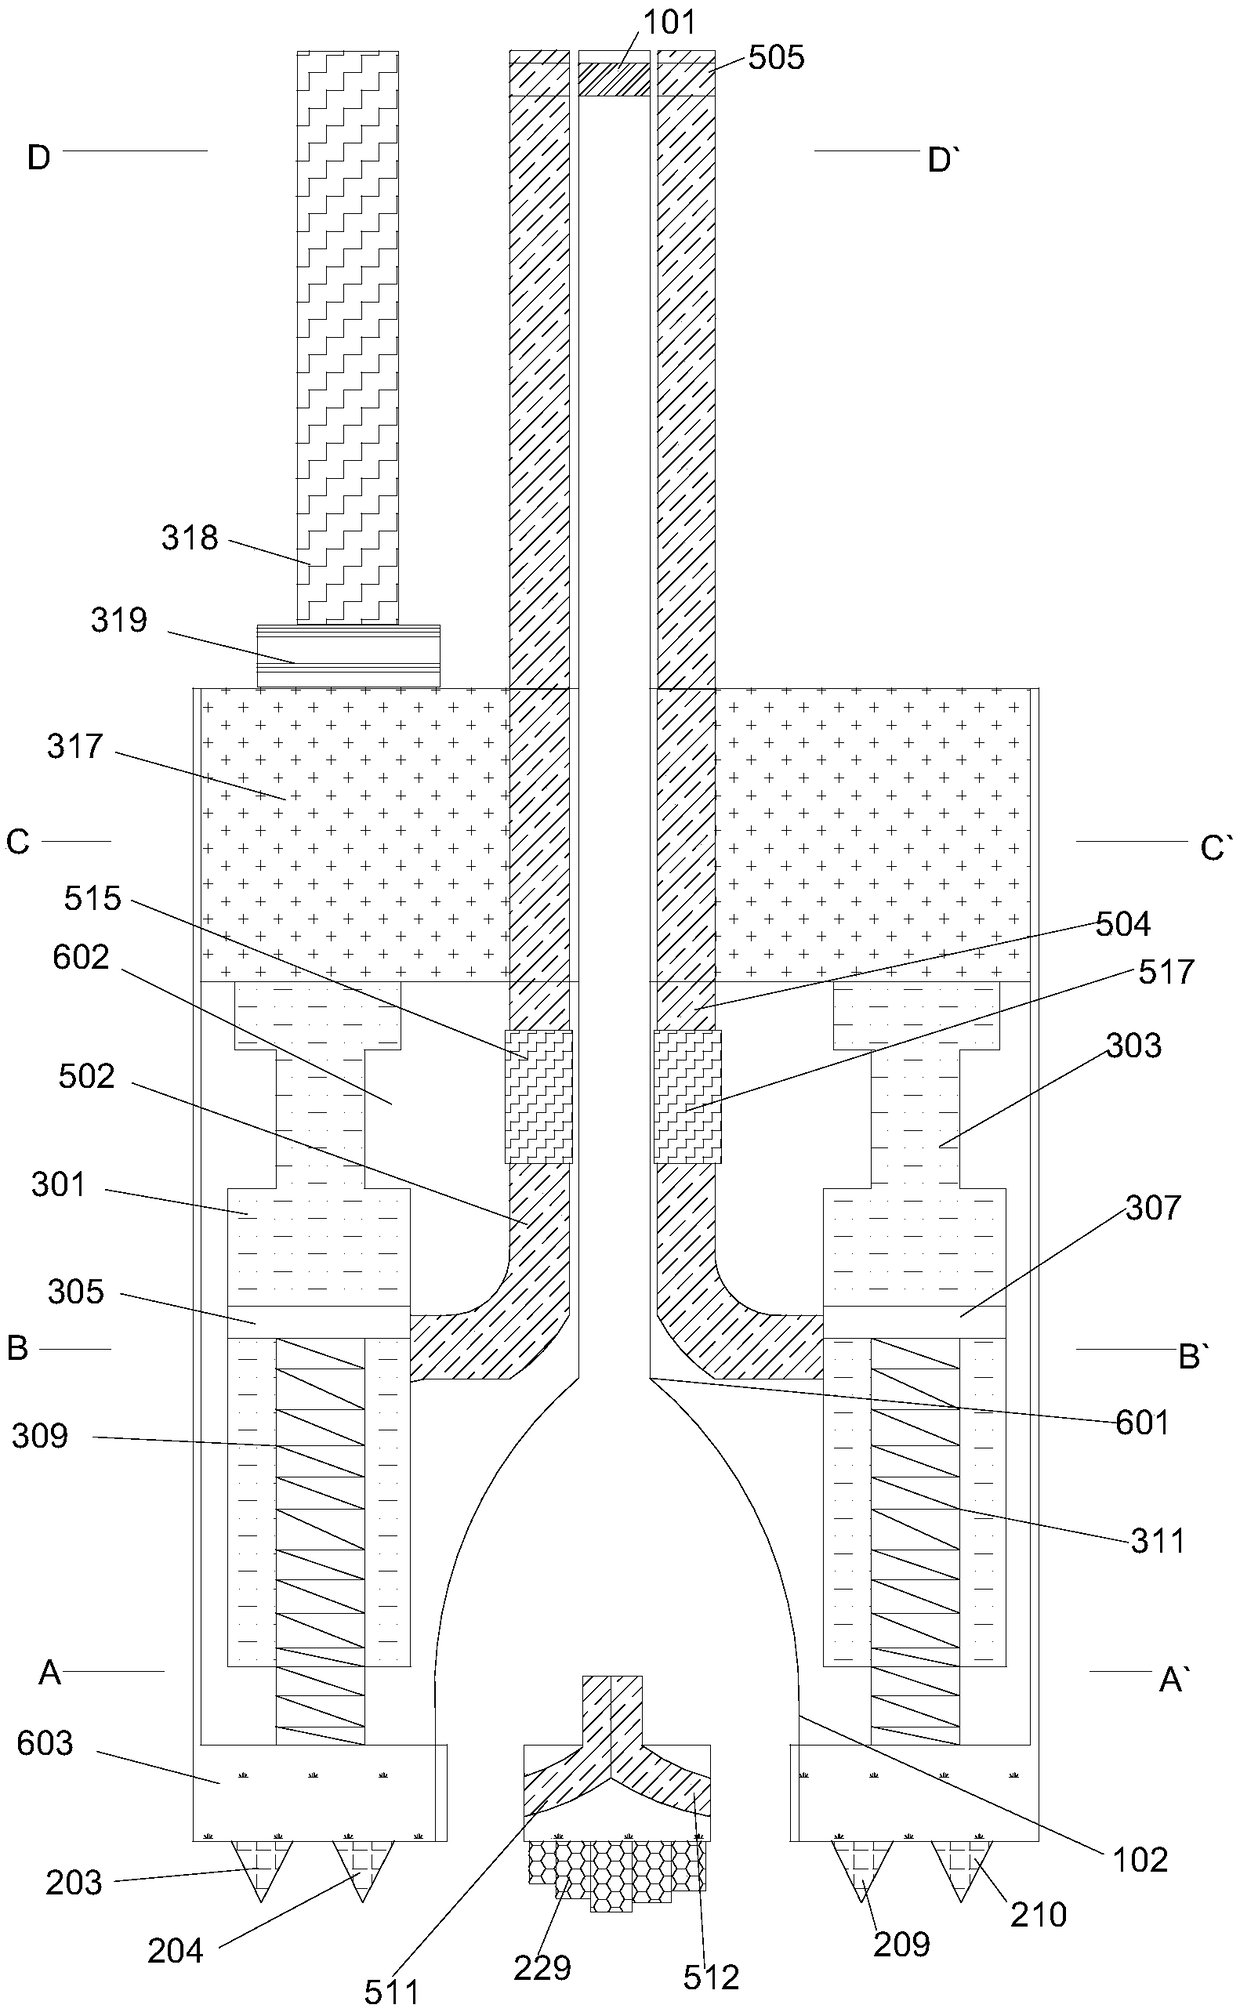 High-water-pressure telescopic composite drilling and cutting method for soft and hard formations